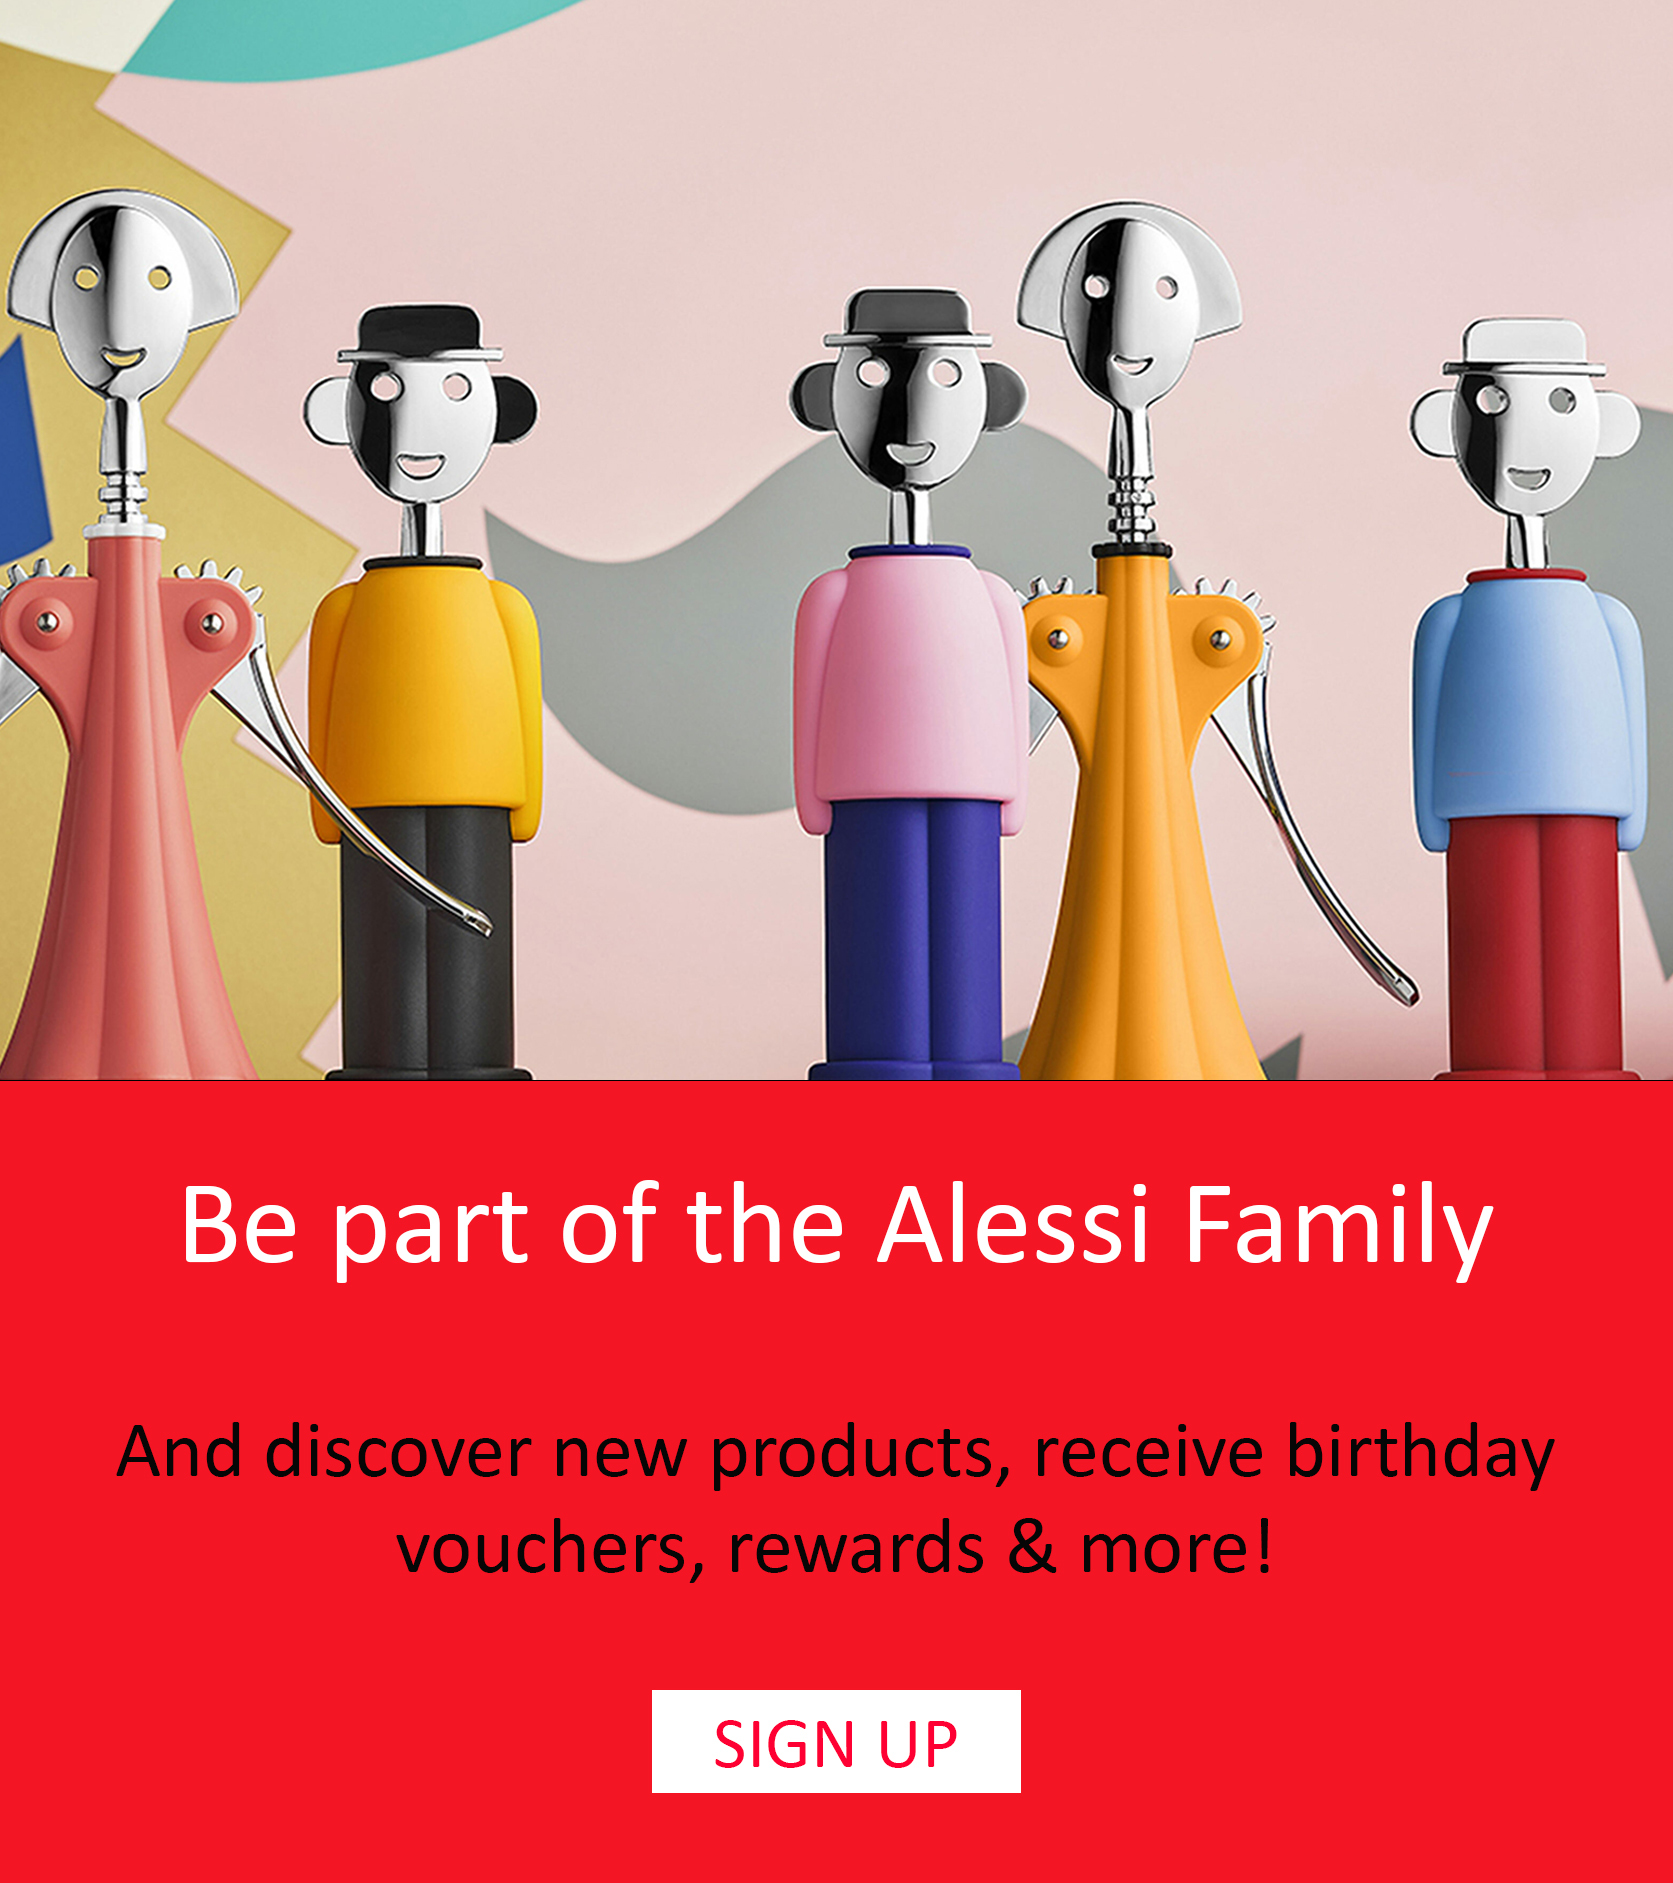 ALESSI SIGN UP mobile